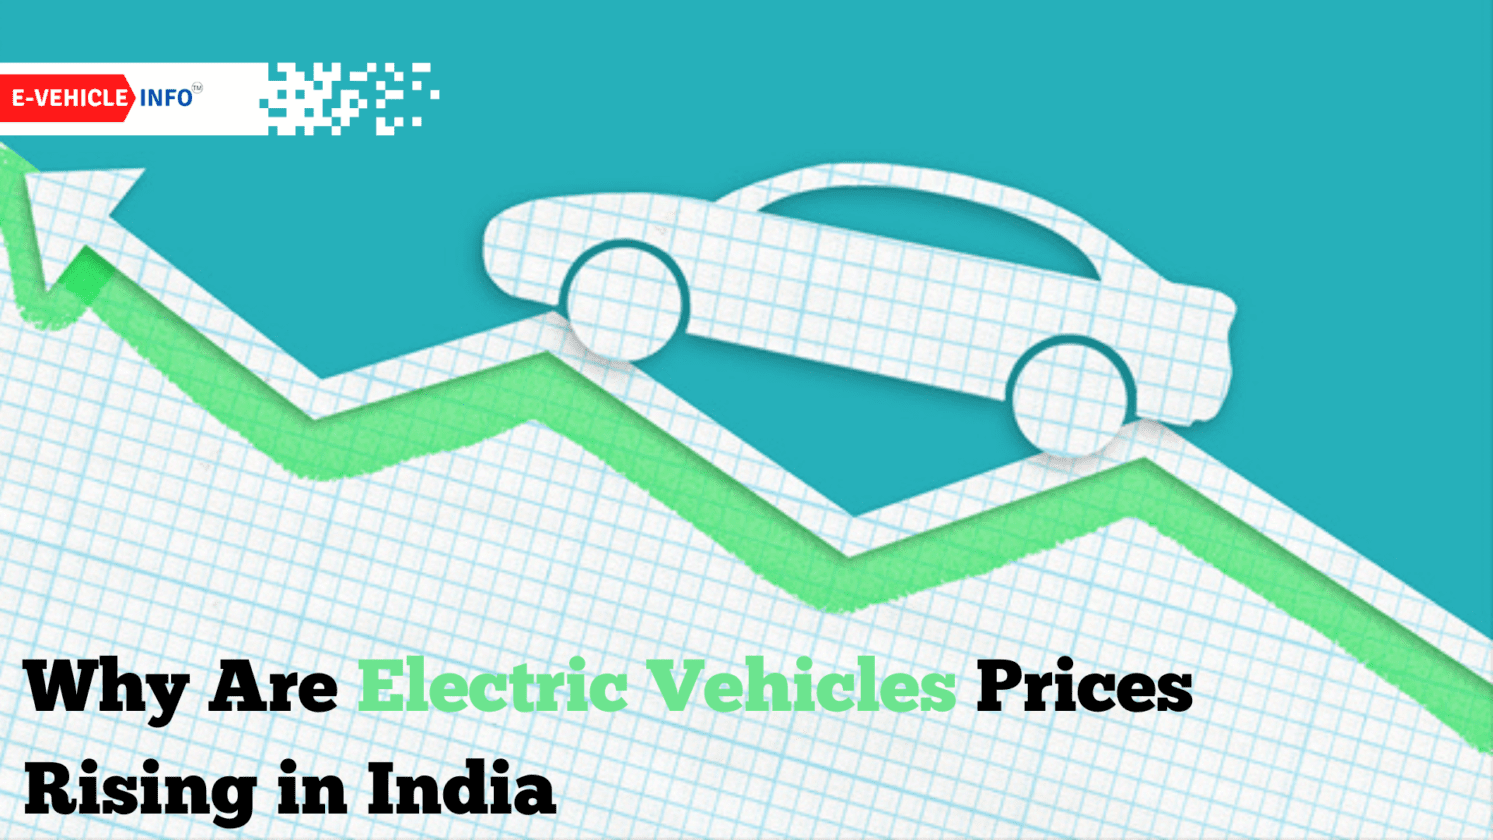 Why Are Electric Vehicles Prices Rising in India EVehicleinfo